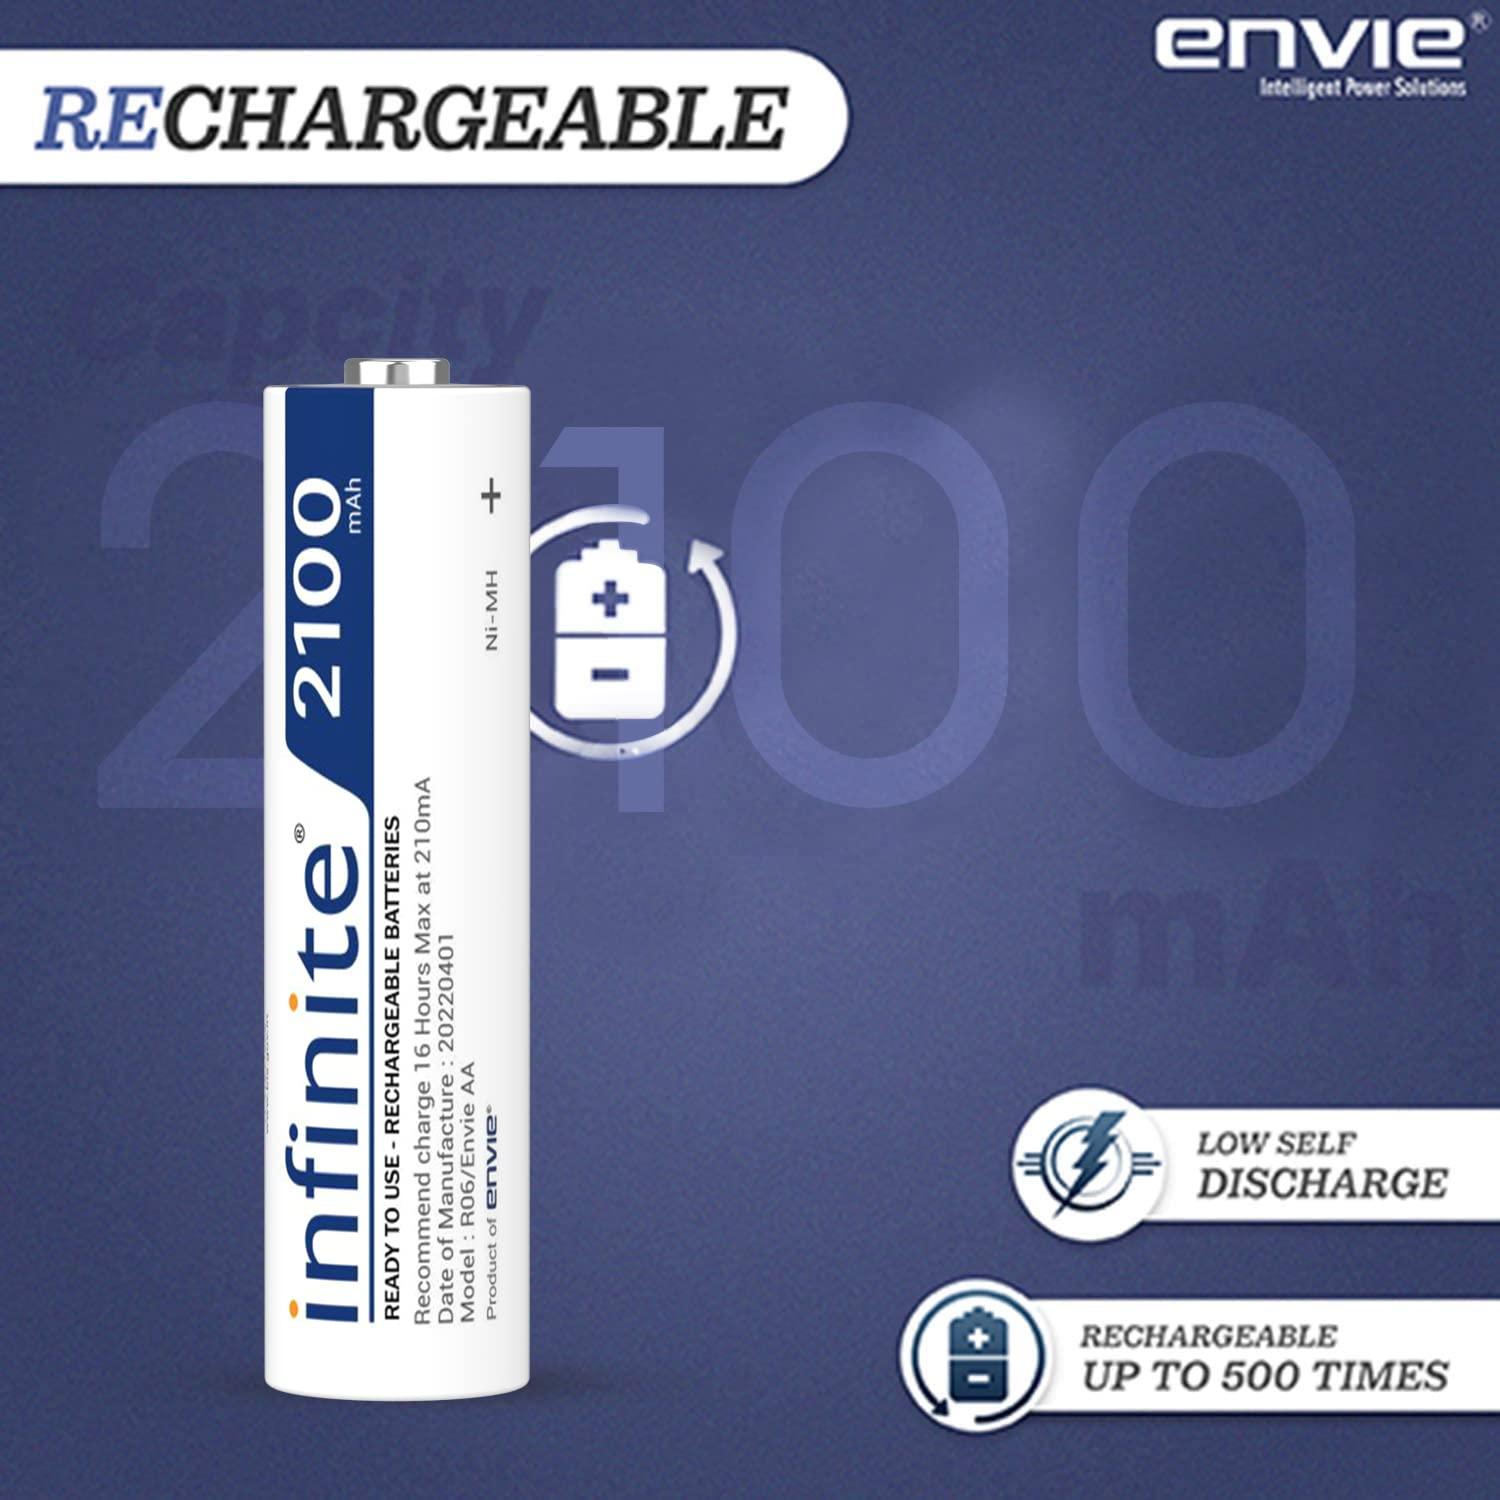 ENVIE (AA 2100 2PL) Infinite Rechargeable Battery for Remote Controls, Electronic Toys, Cameras, Flashlights and Others - Digitek